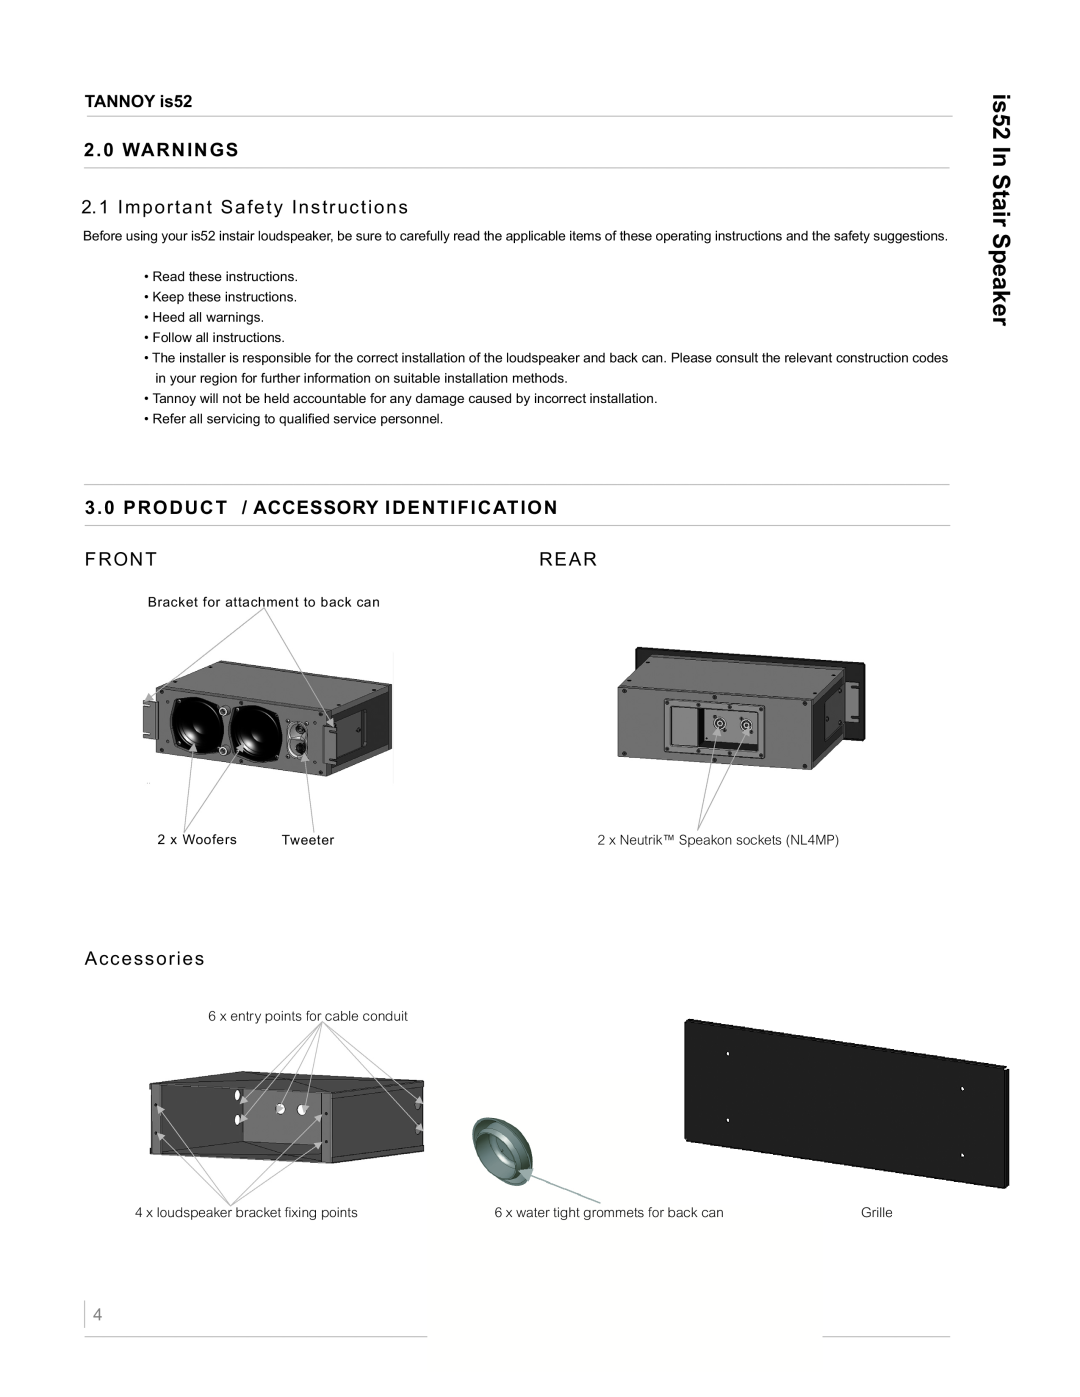 TOA Electronics IS52 is52 In Stair Speaker, Warnings, Important Safety Instructions, Product / Accessory Identification 